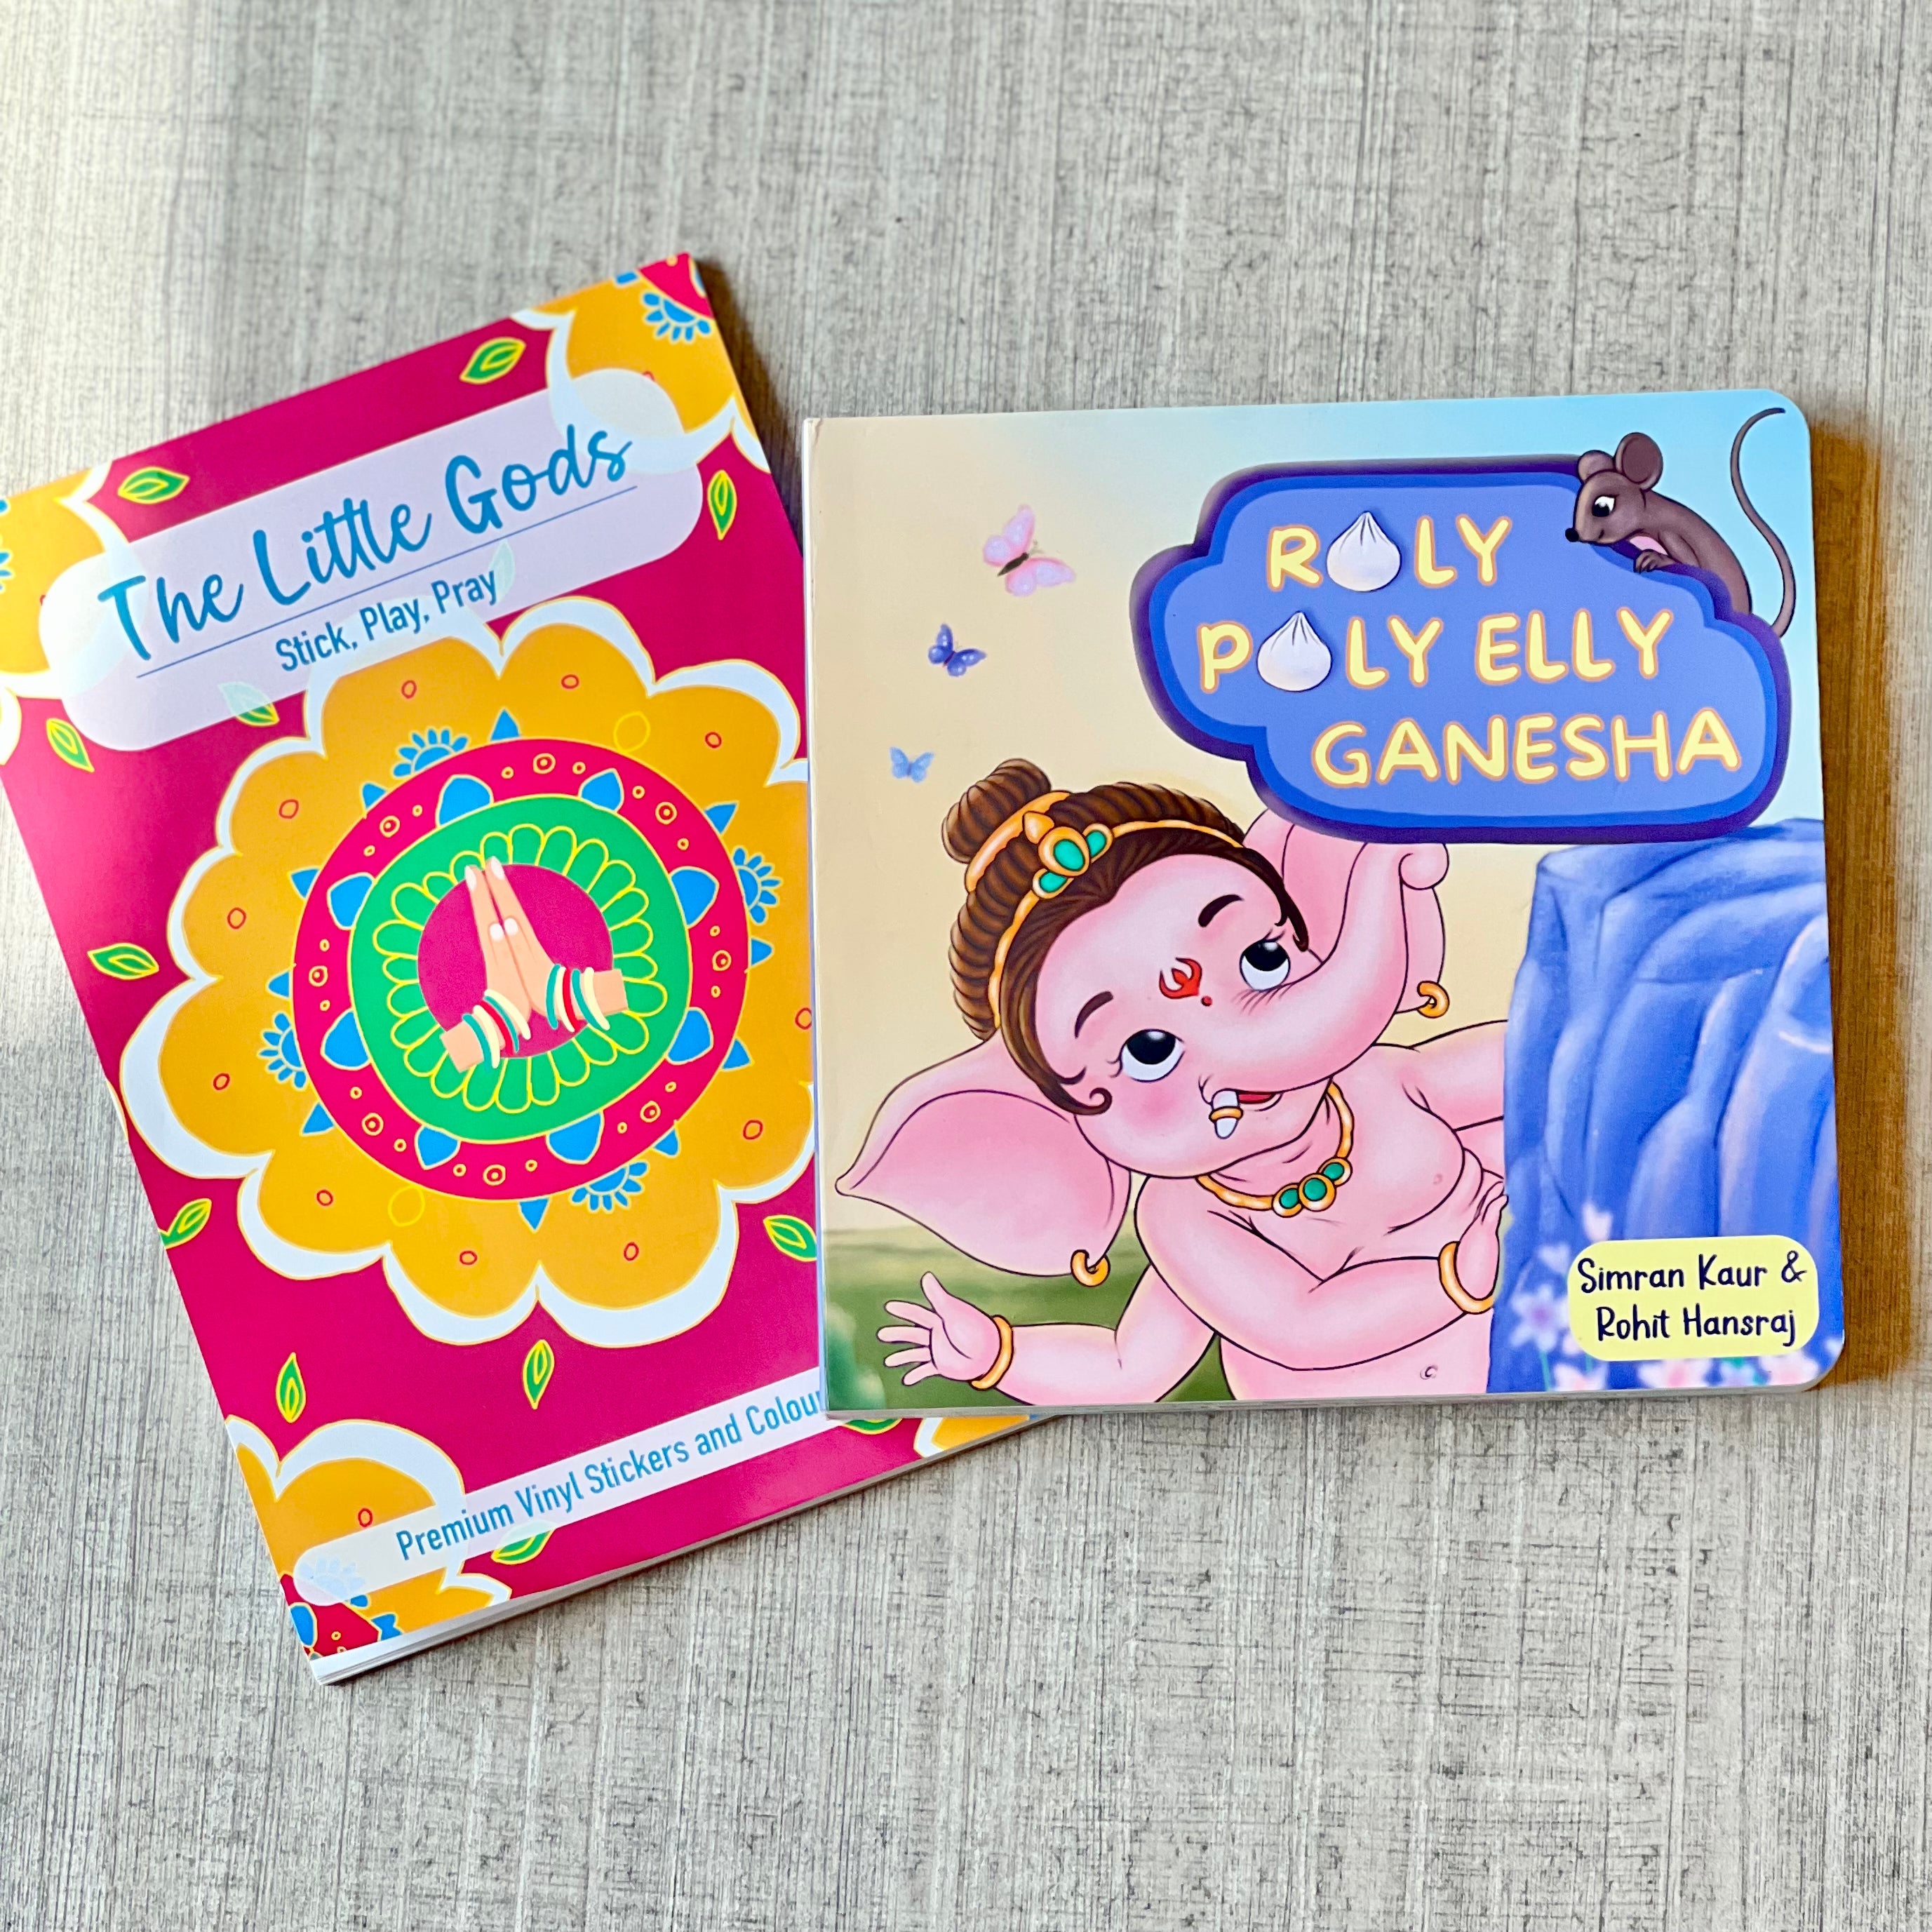 Little God Combo - Roly Poly Elly Ganesha: The Little God Story Book + The Little Gods Sticker Booklet